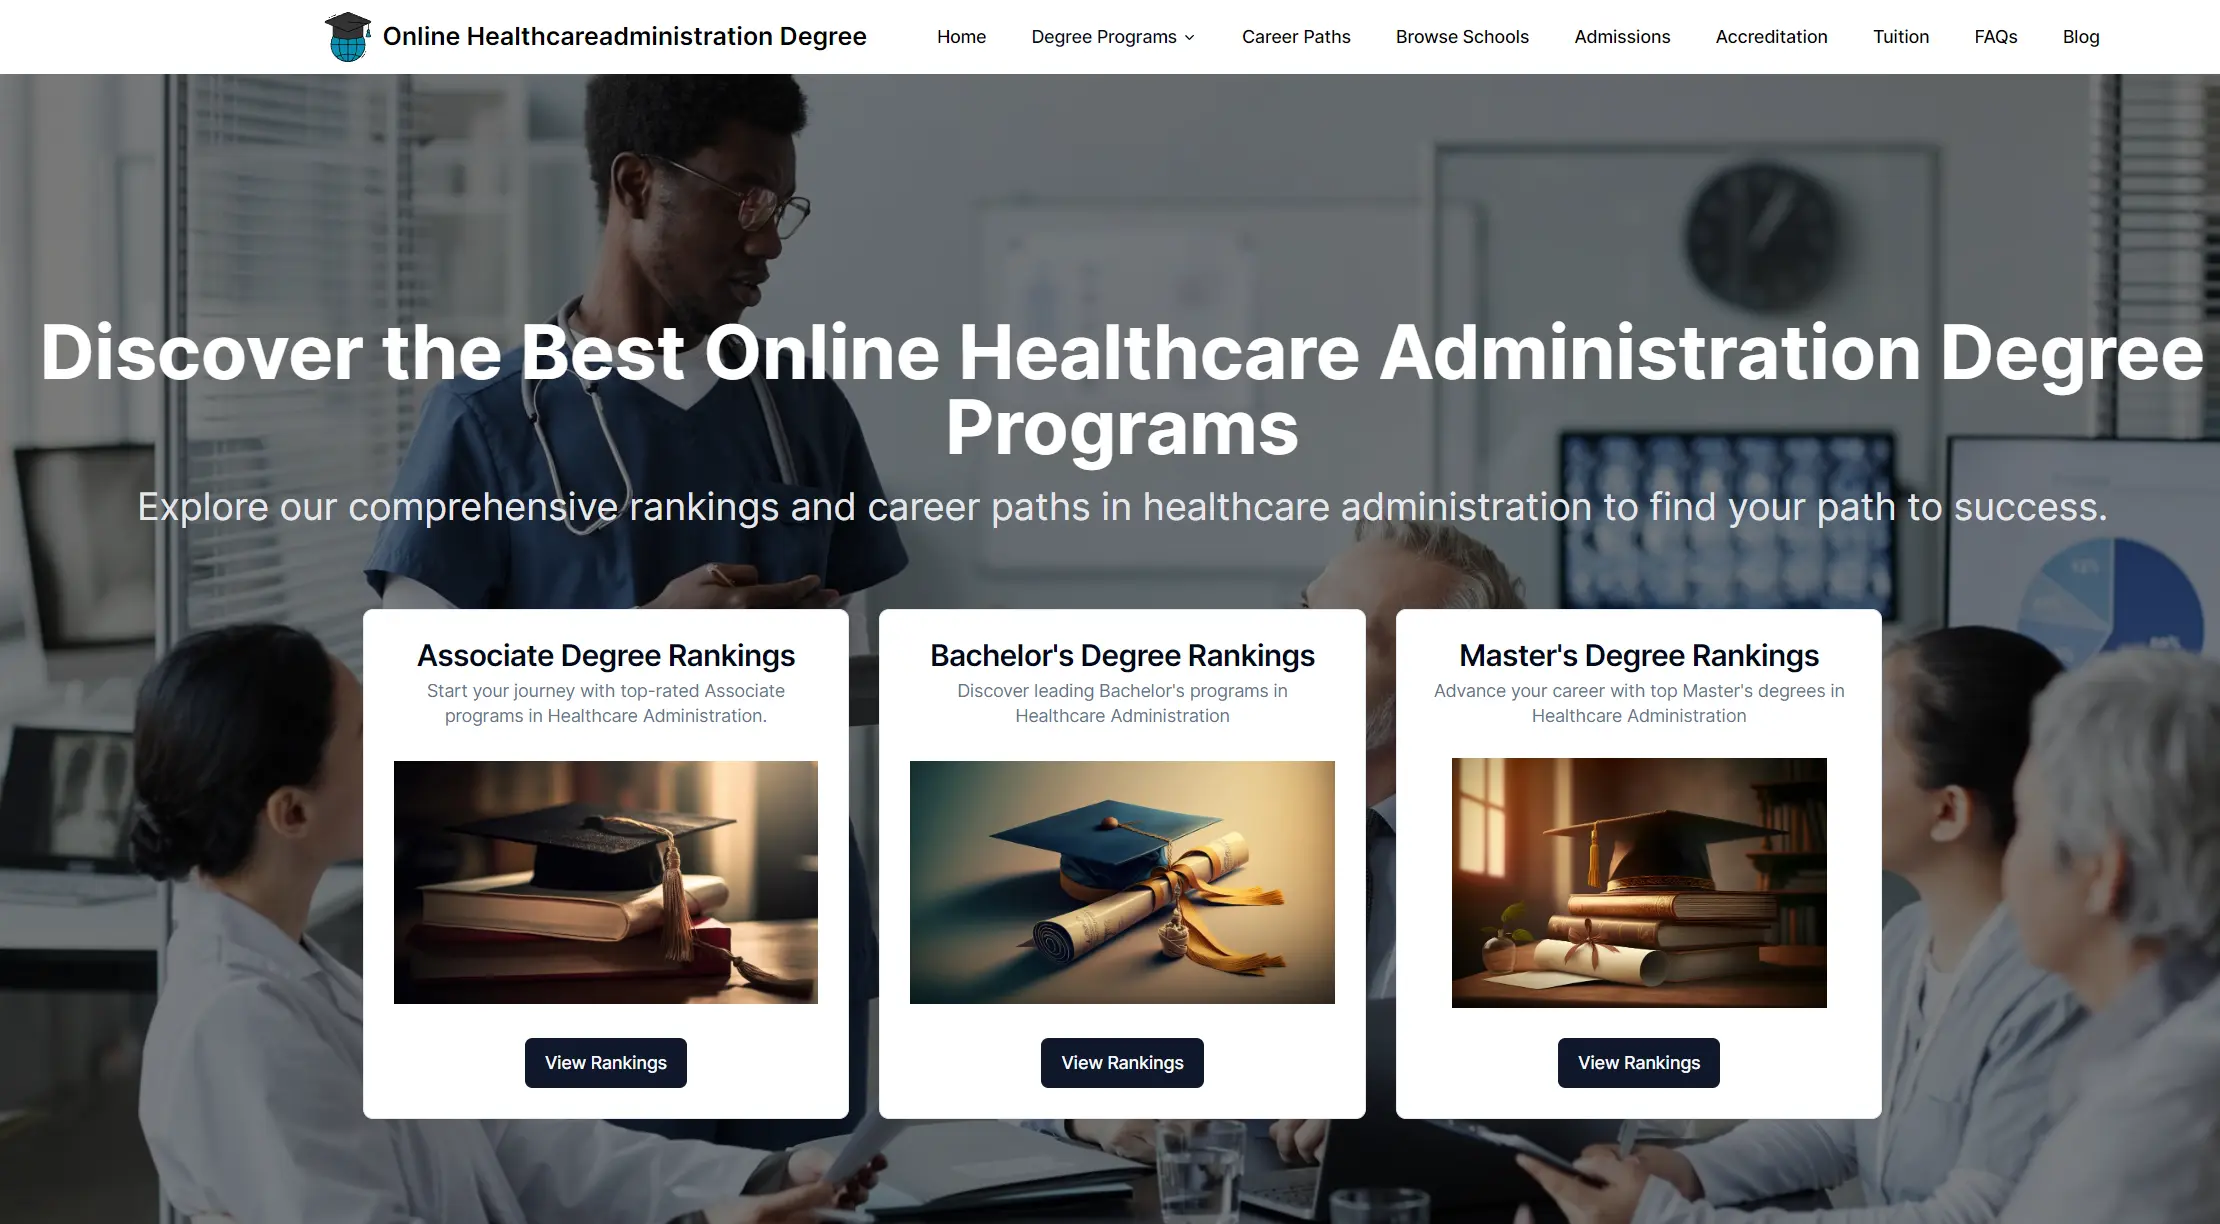 Online Healthcare Administration Degrees site thumbnail